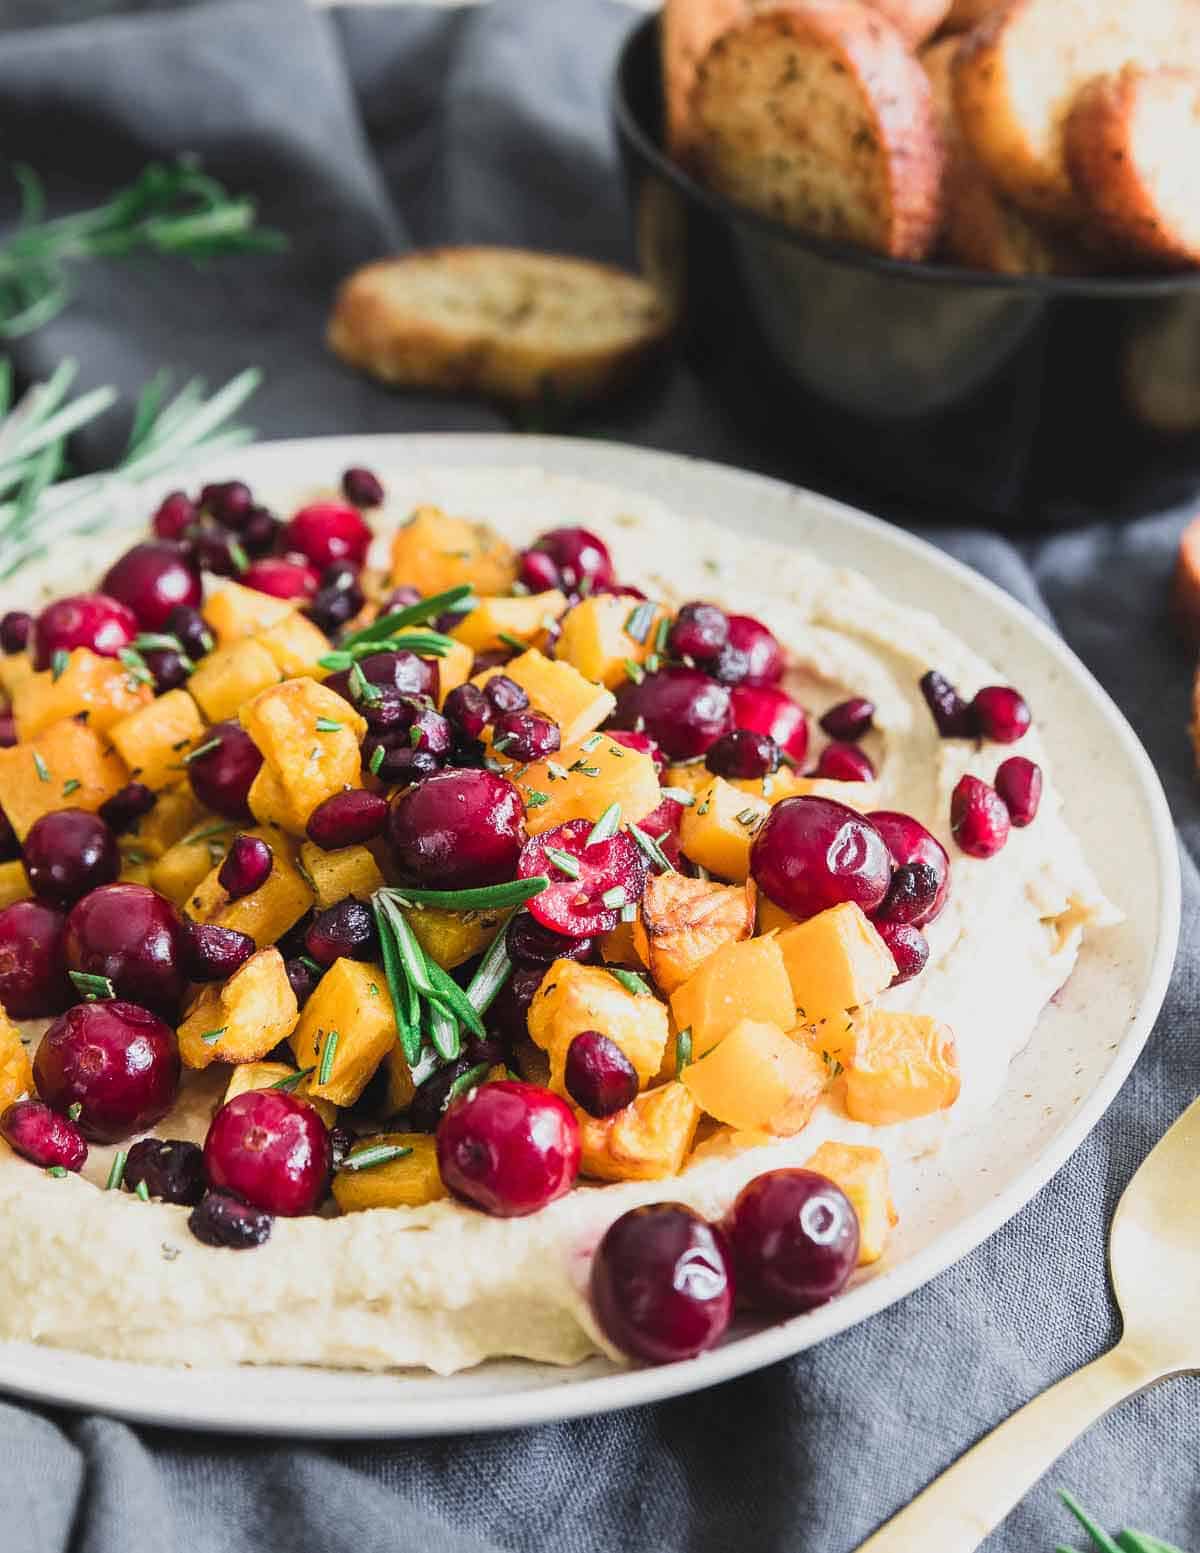 This butternut squash hummus makes a great holiday appetizer. With cranberries, pomegranates and rosemary, it's a festive and fun dish to share!